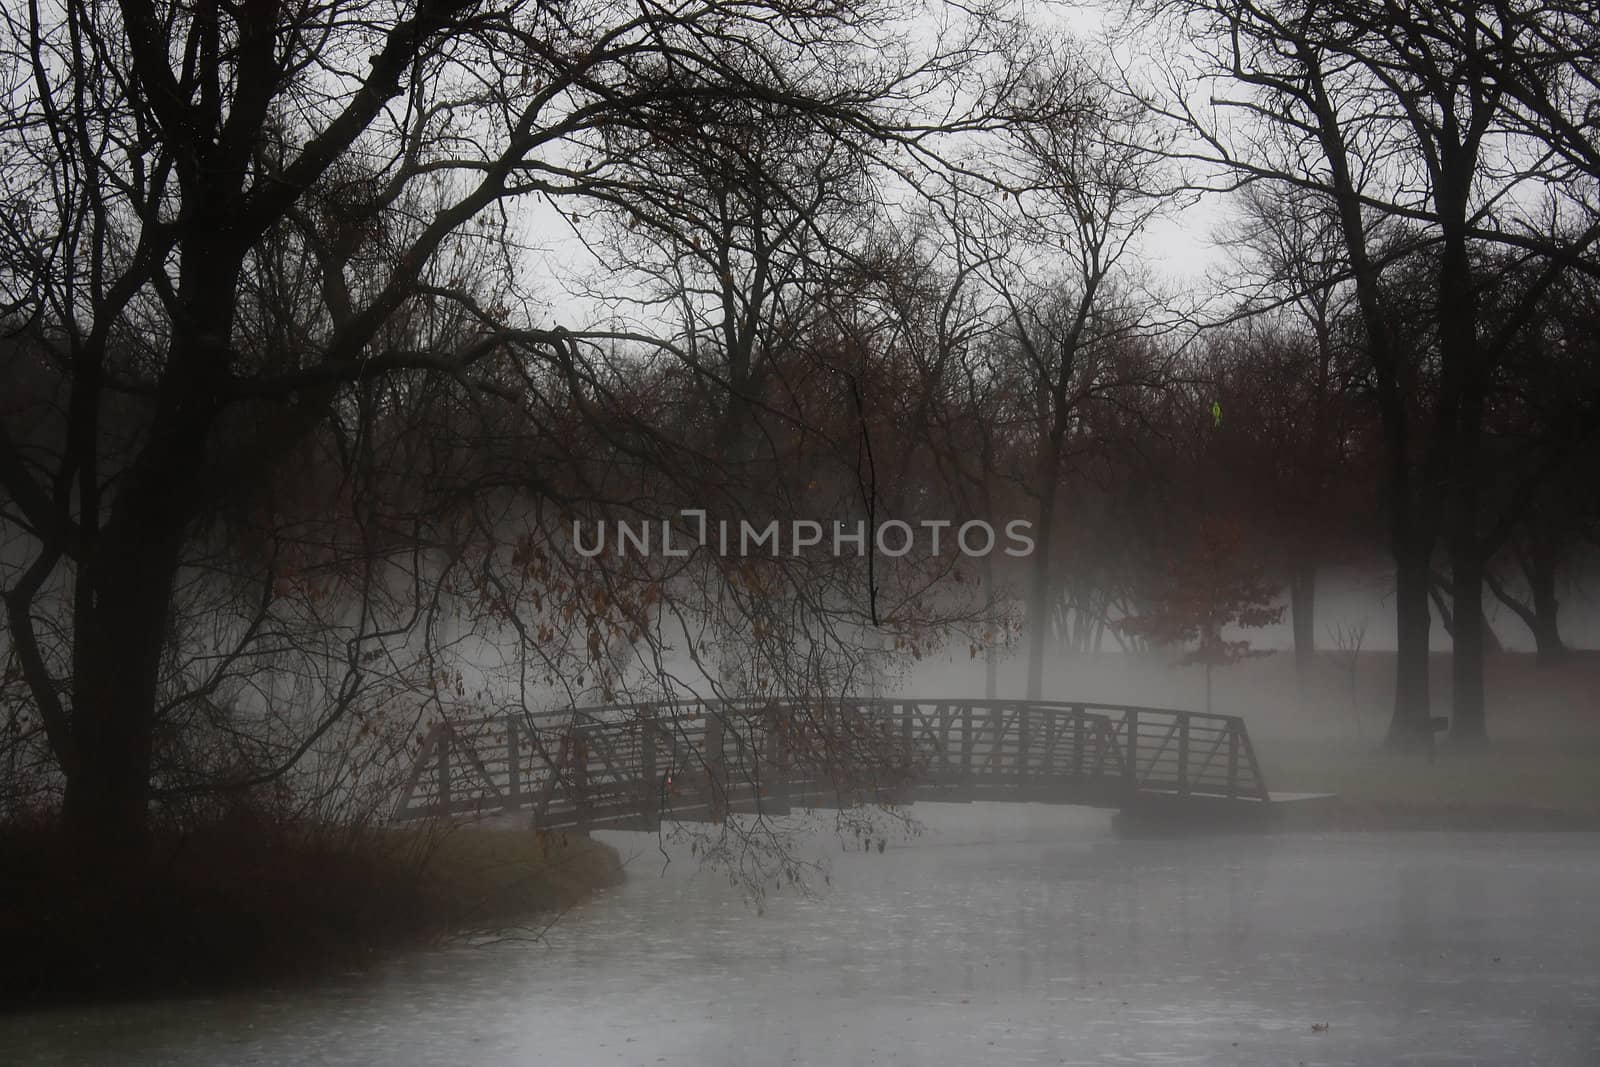 fog hovers over a bridge in a park on a cool afternoon